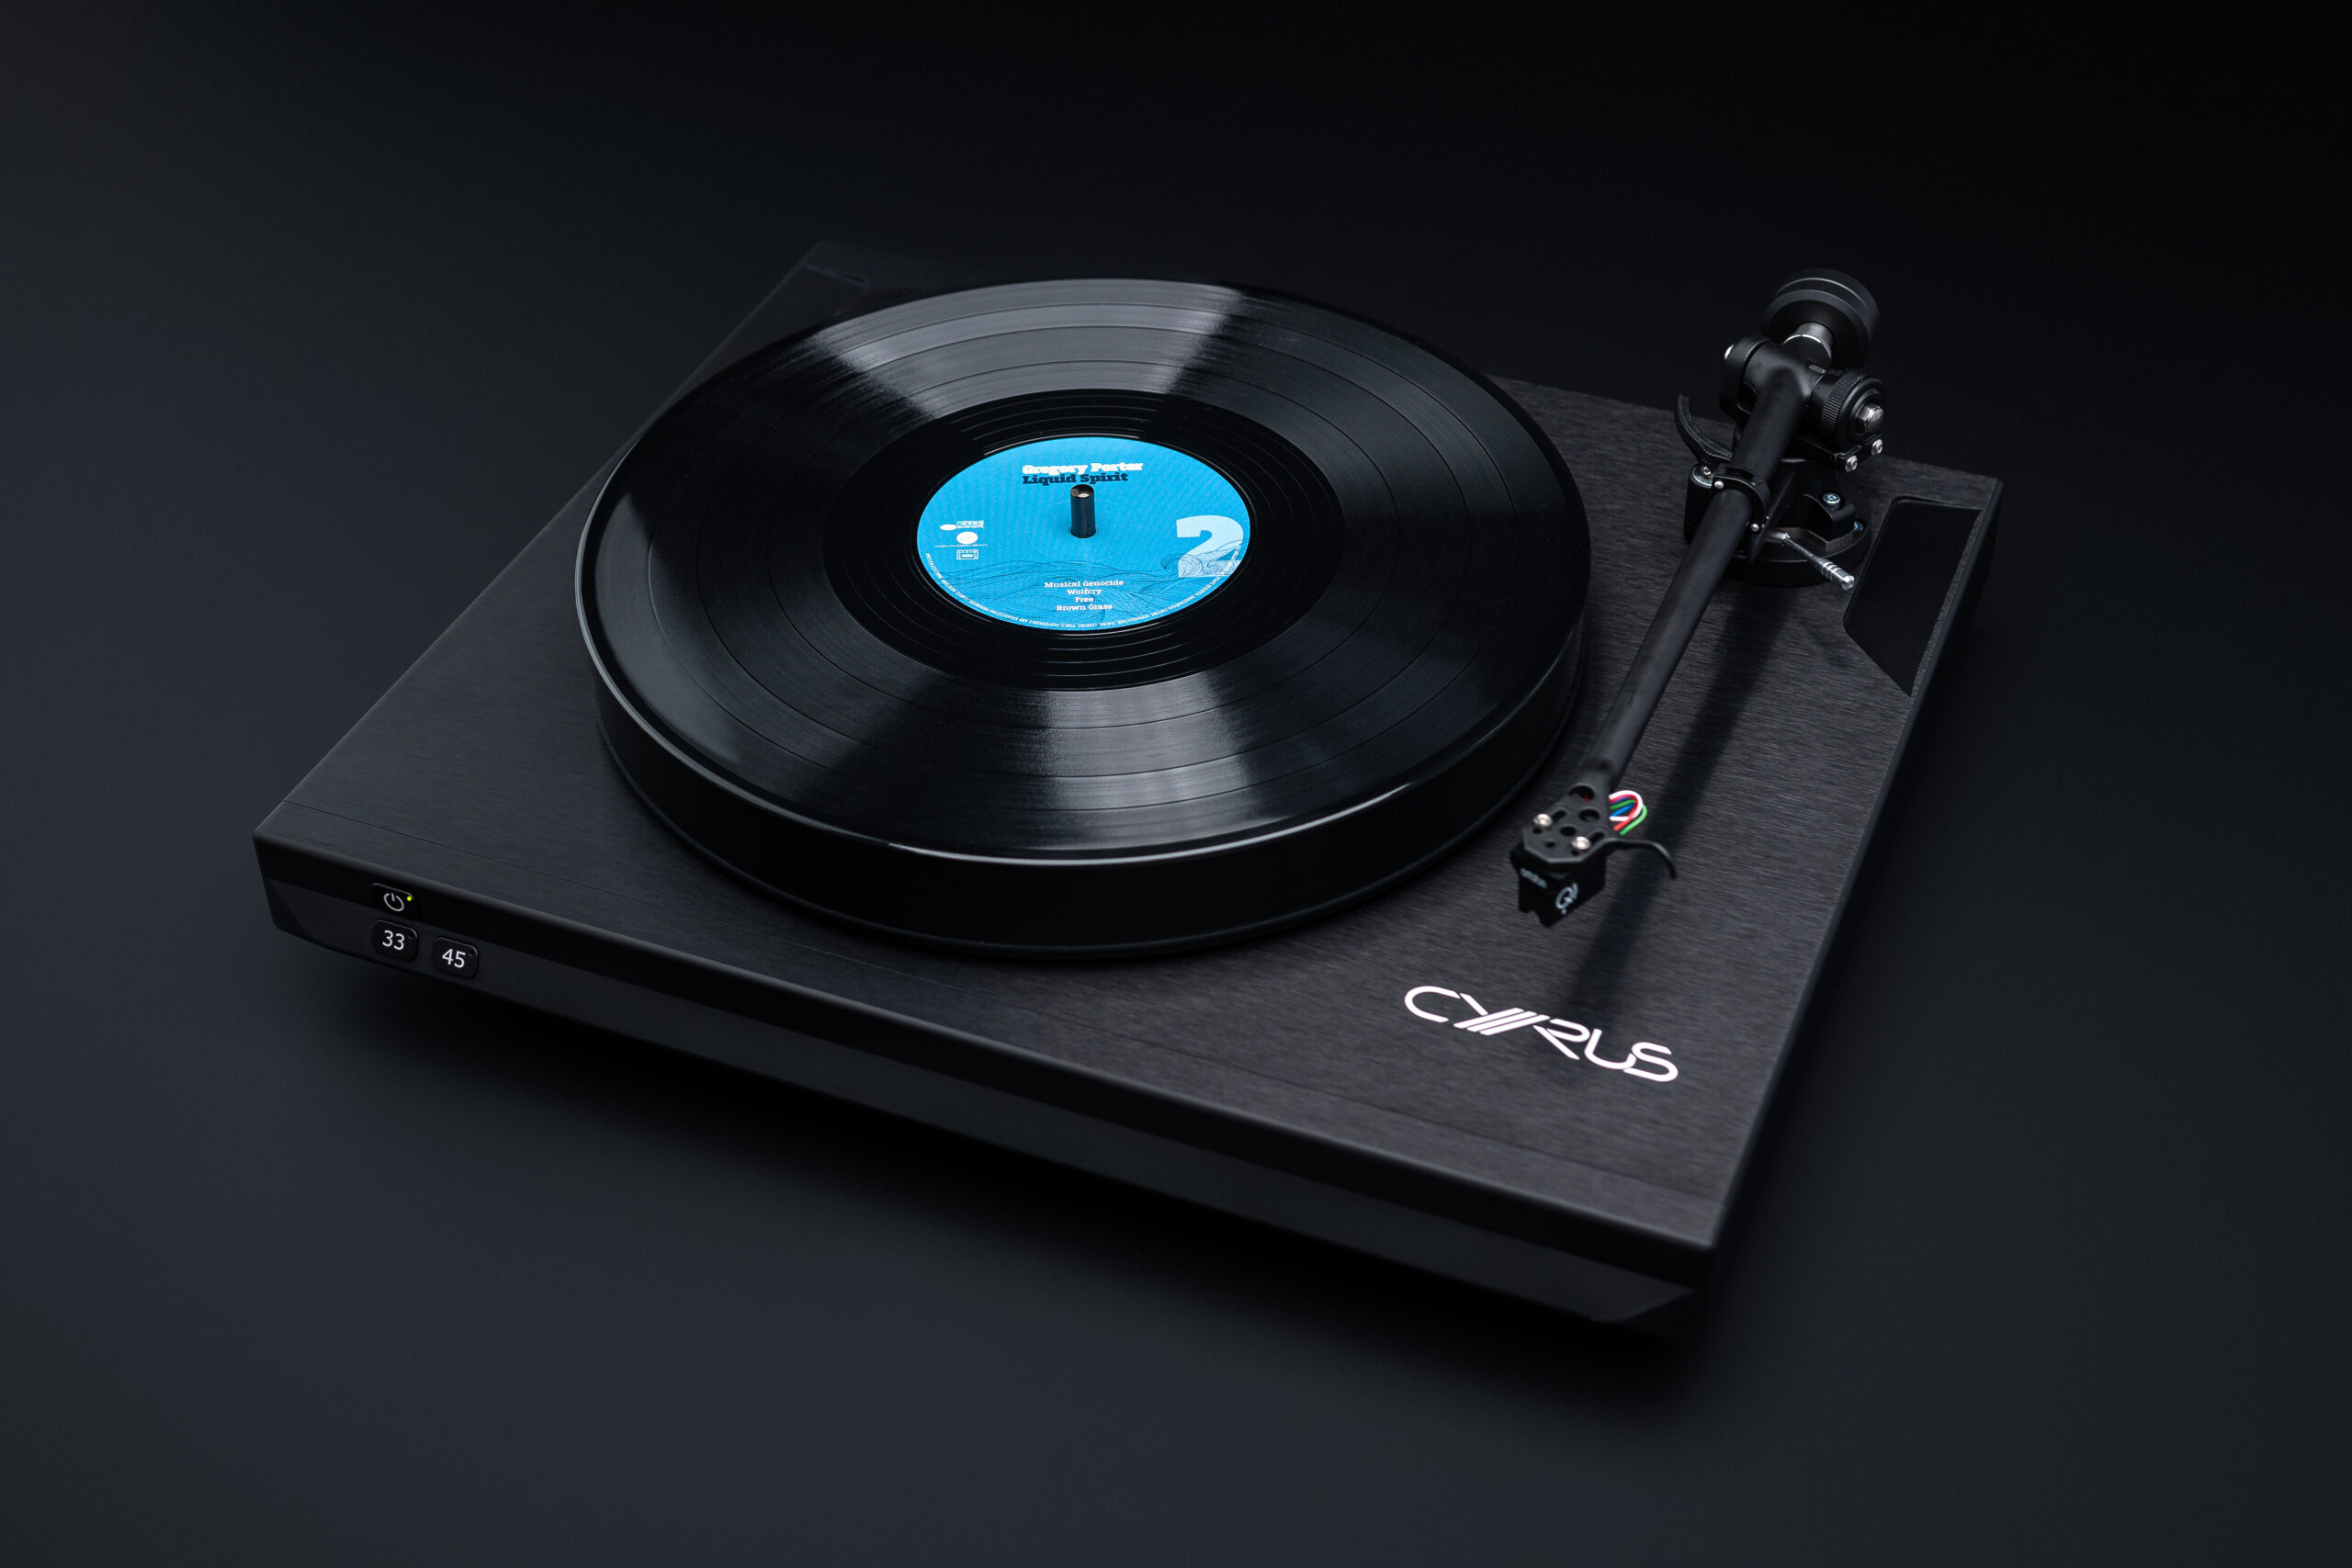 Say hello to the Cyrus Turntable